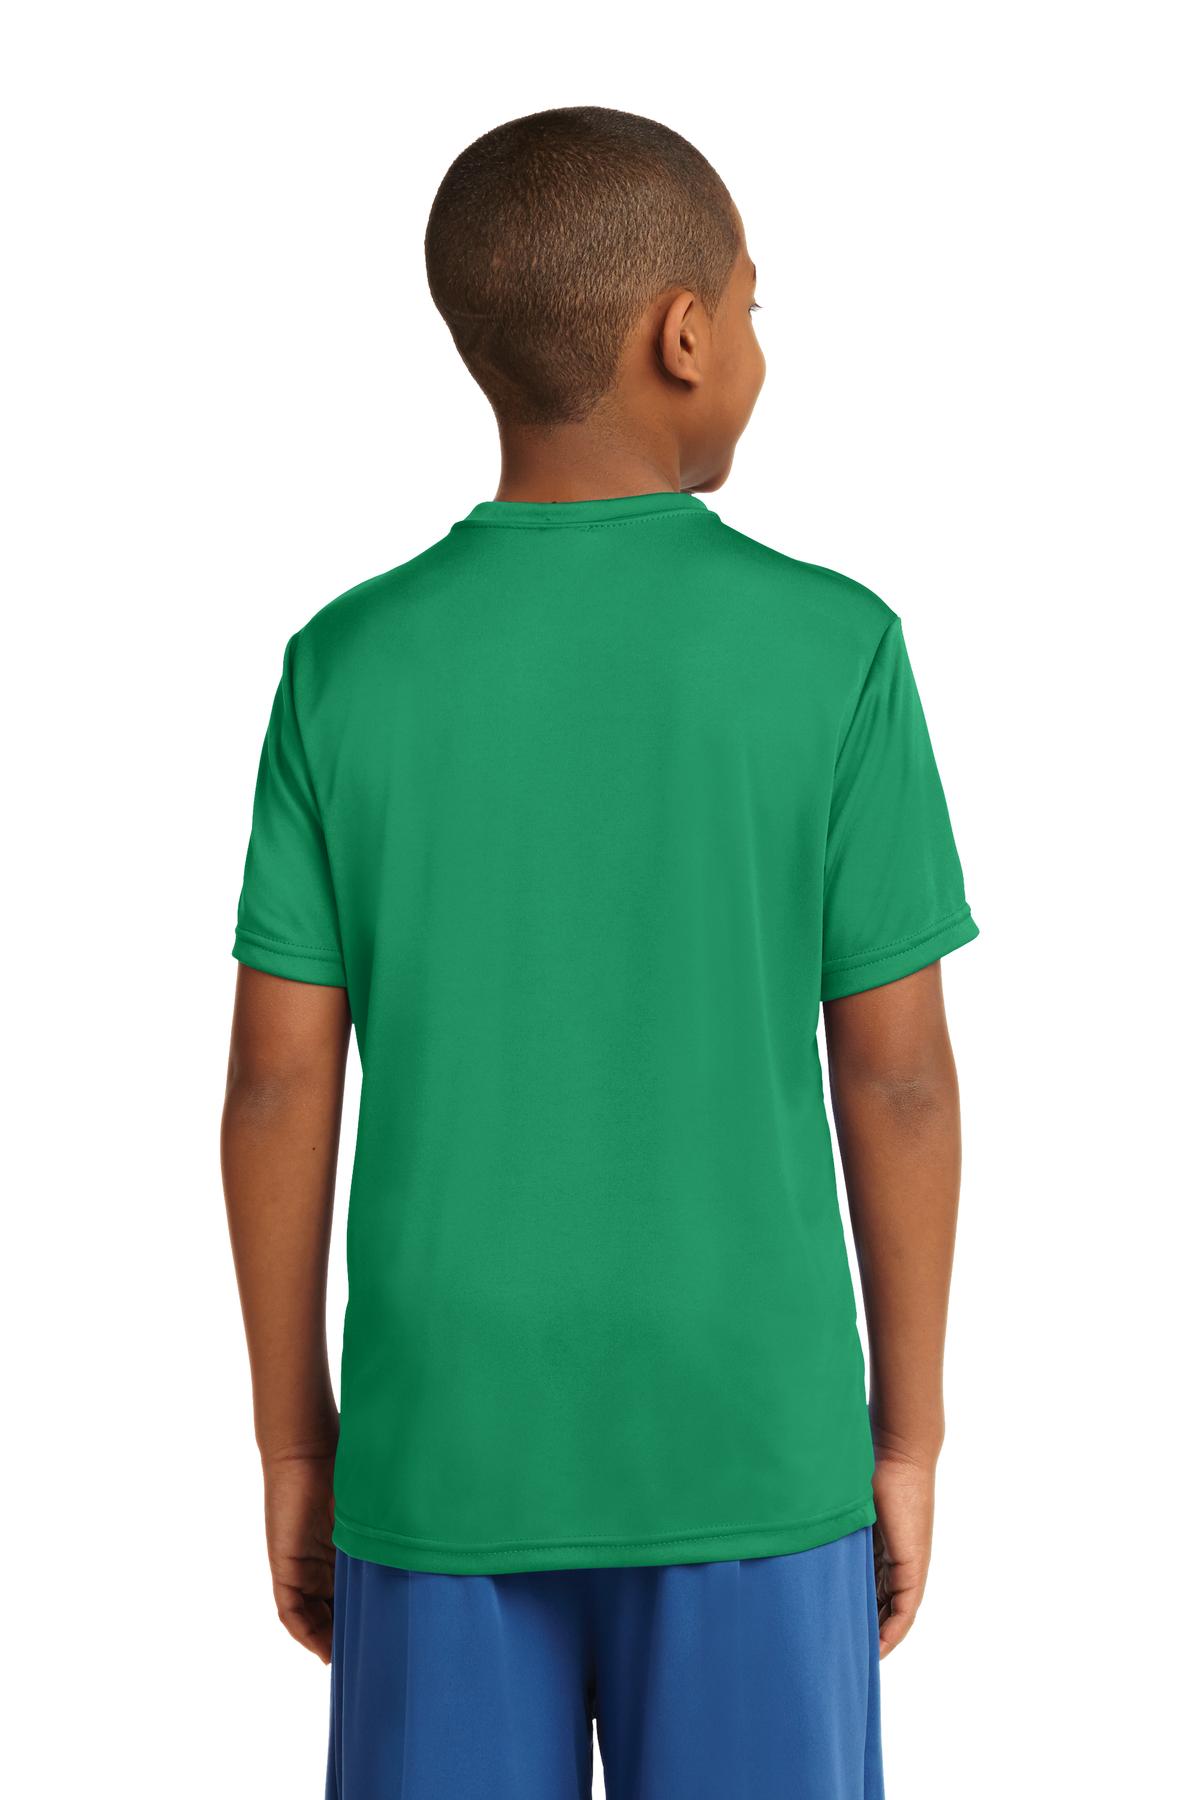 Sport-Tek® Youth PosiCharge® Competitor™ Tee. YST350 [Kelly Green] - DFW Impression